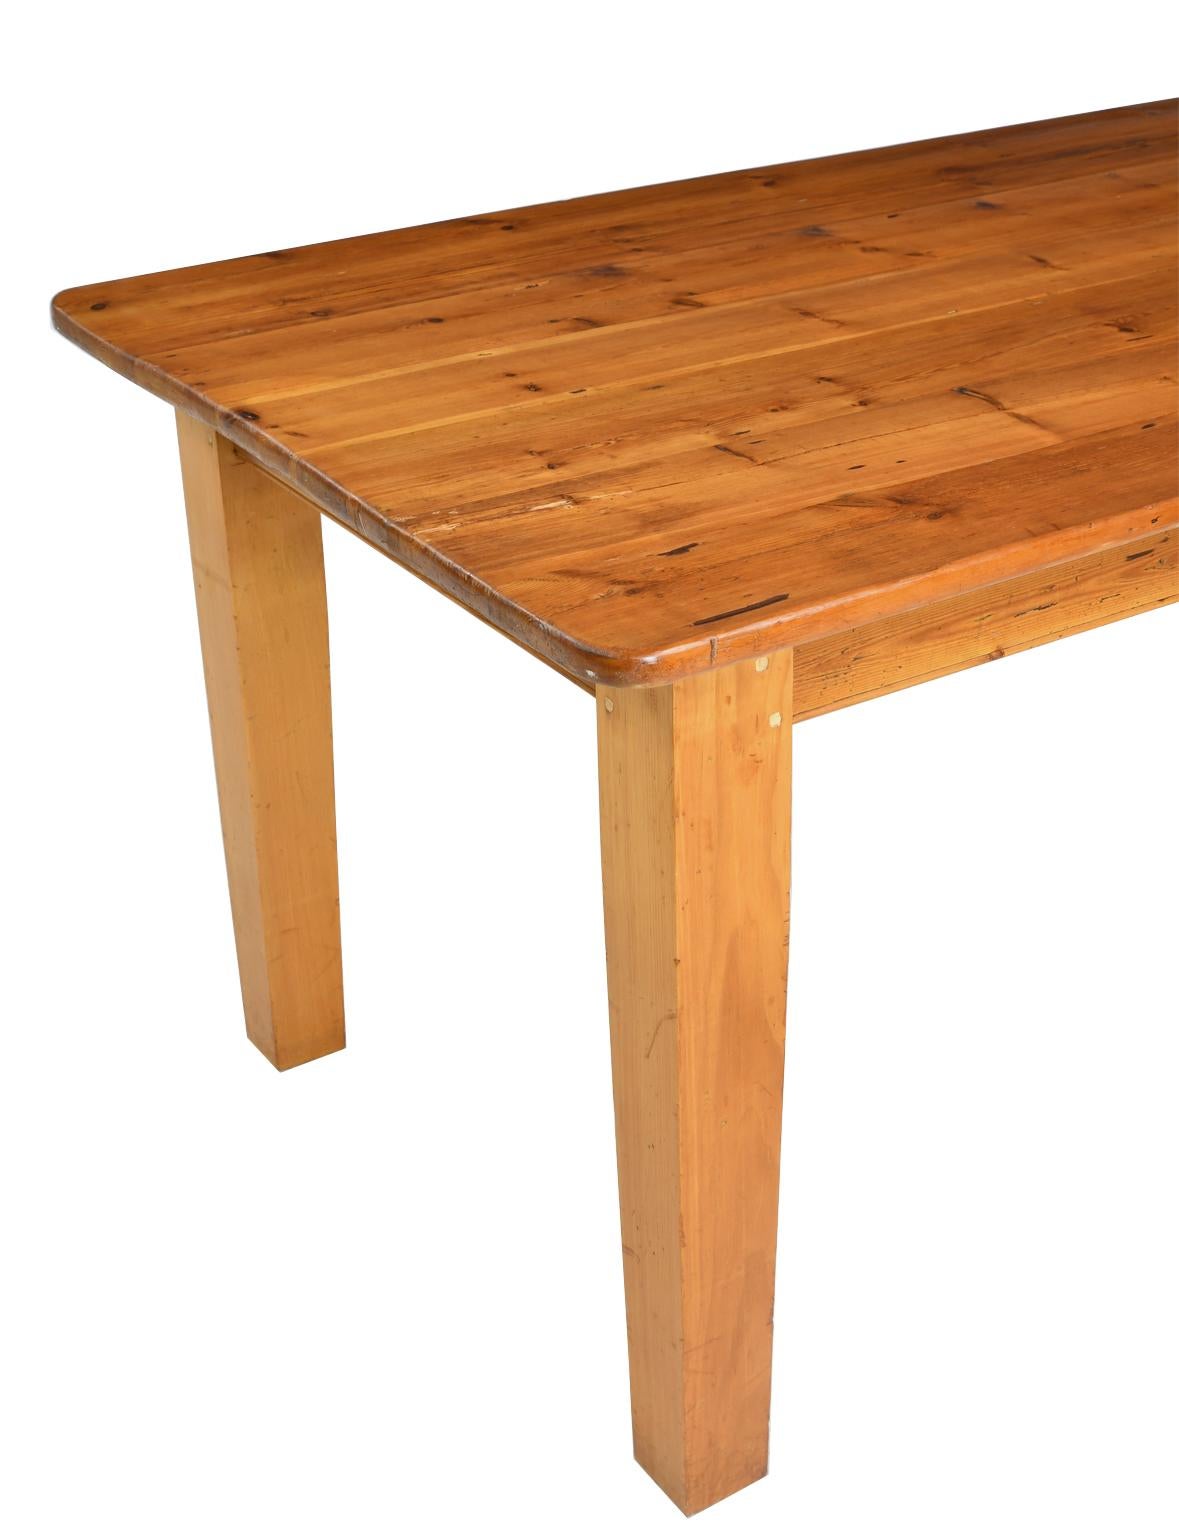 20th Century Long English Pine Farmhouse Dining Table with Tapered Legs and Antique Plank Top